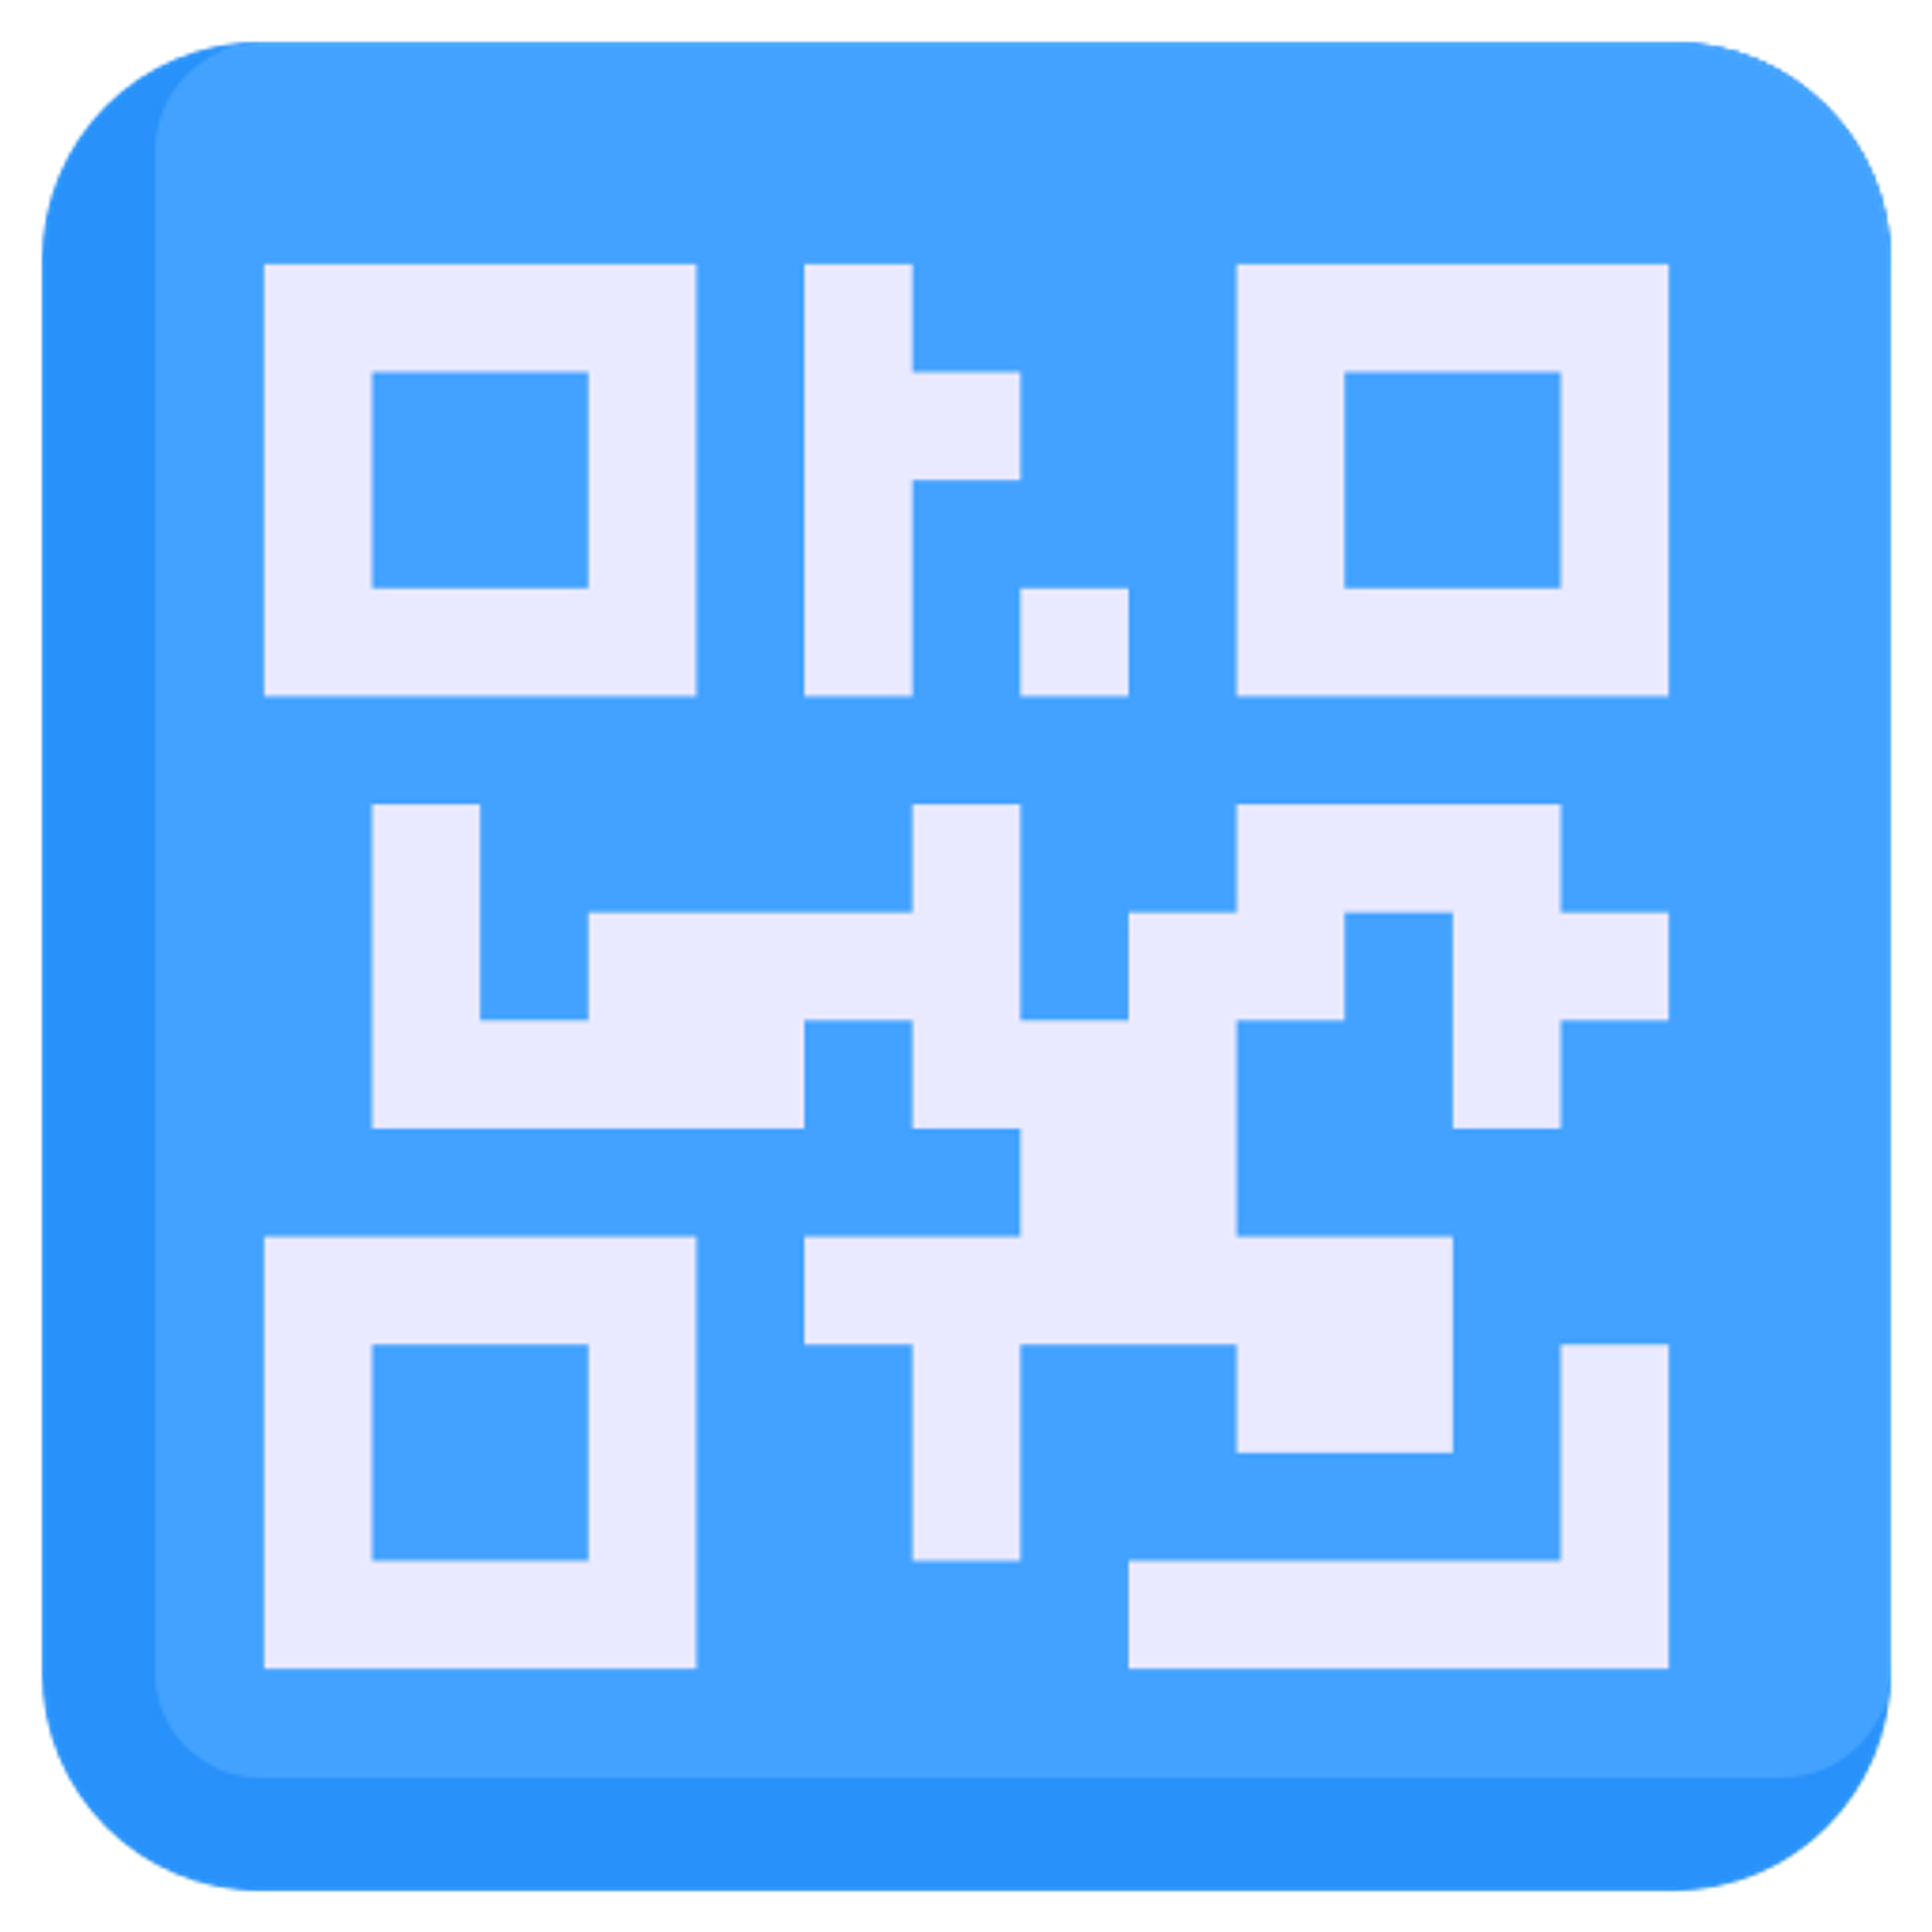 Share your form with a QR code